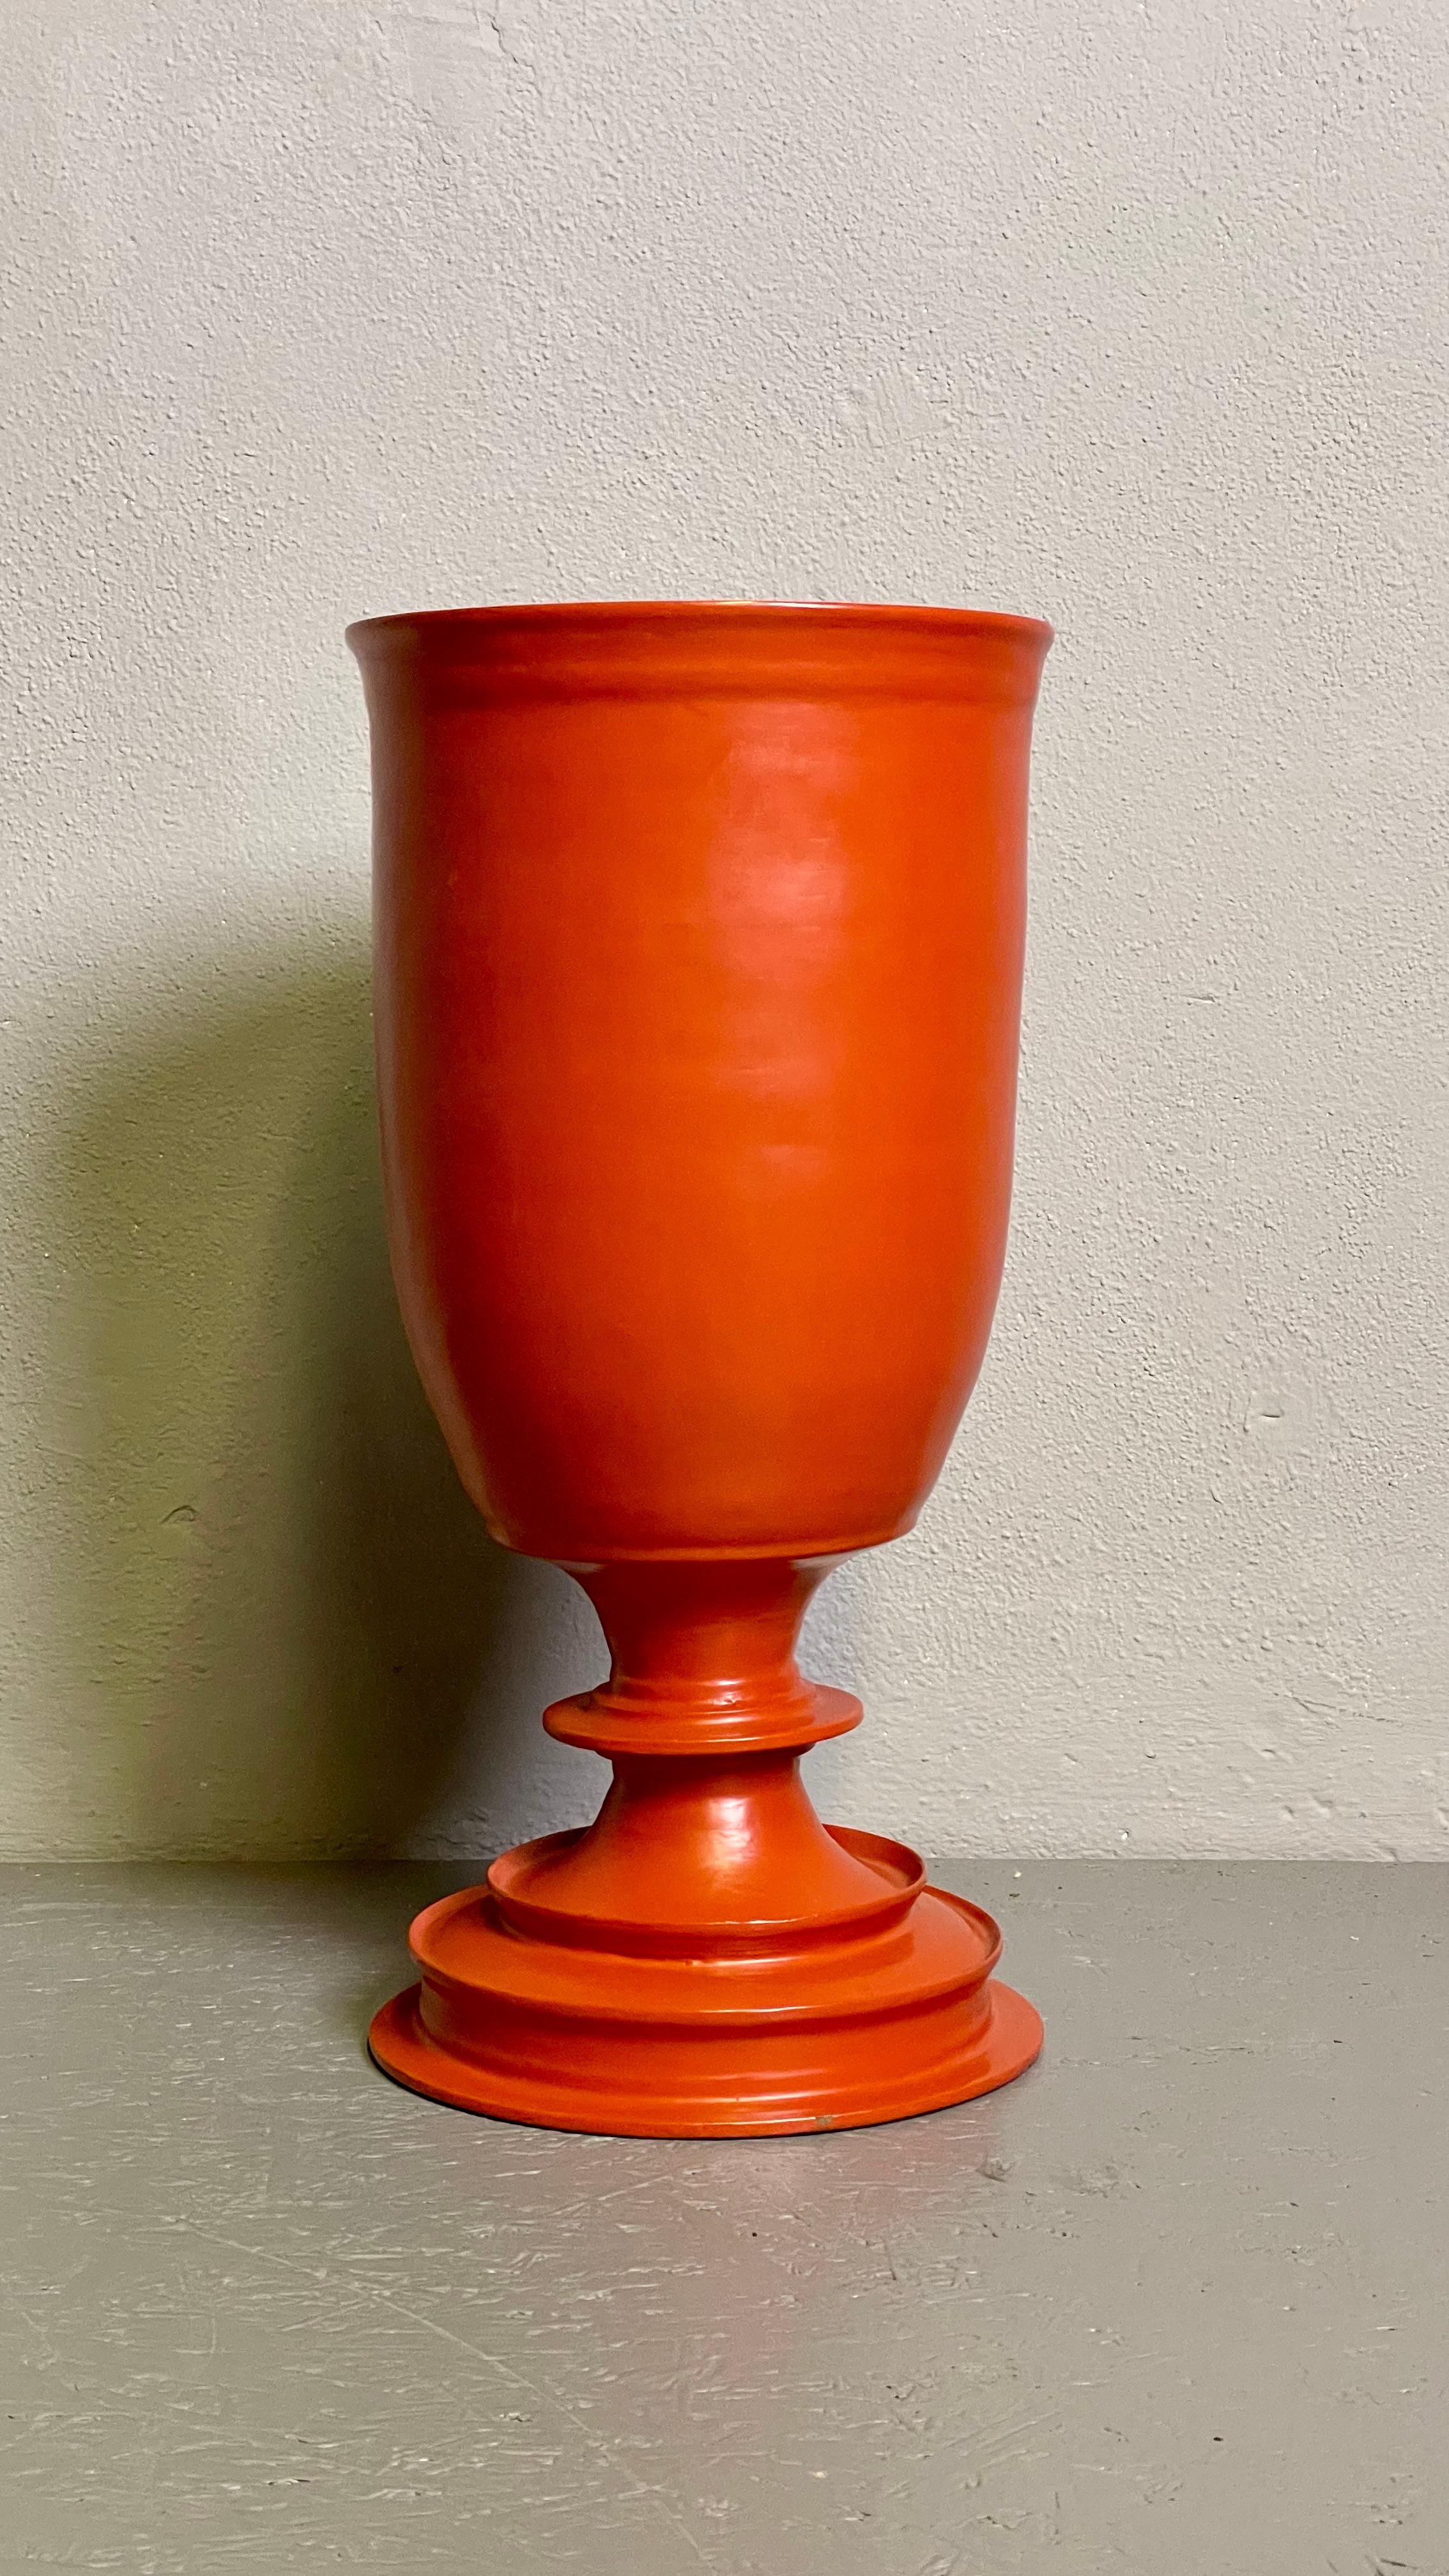 This Orange-Red Papier-mâché Vase was made in China, 1970s.